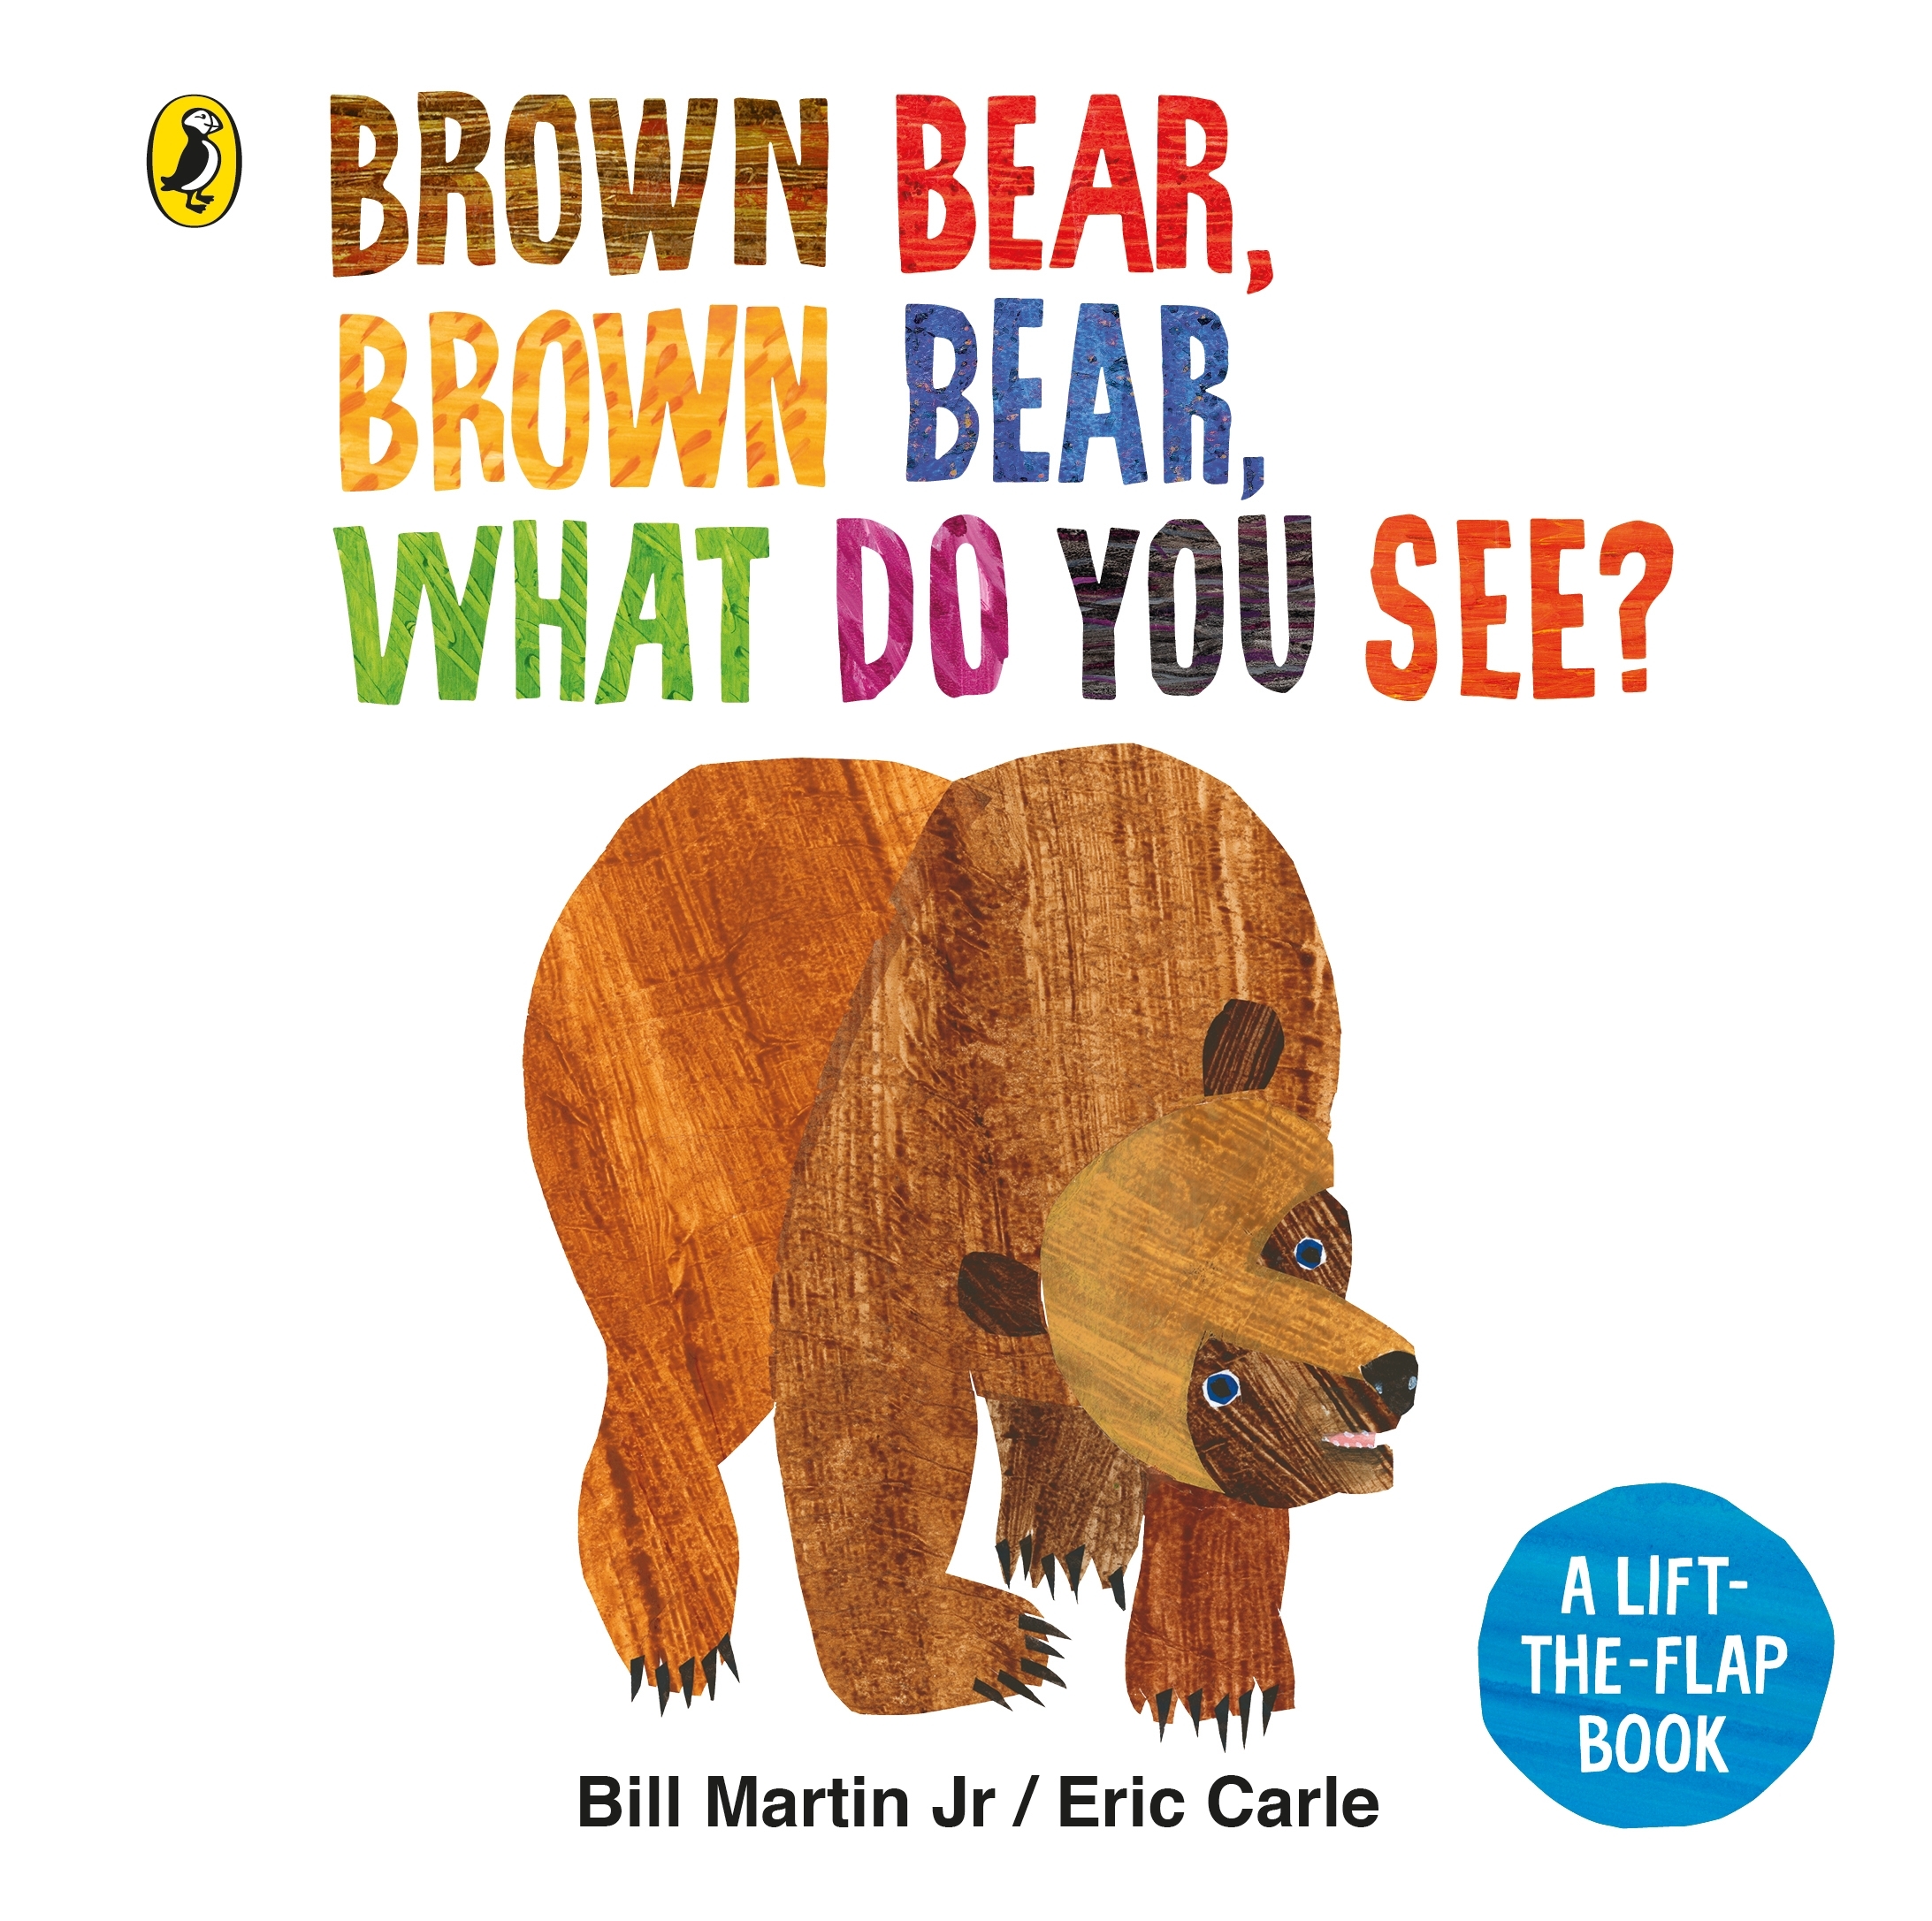 Brown Bear, Brown Bear, What Do You See? by Bill Martin Penguin Books